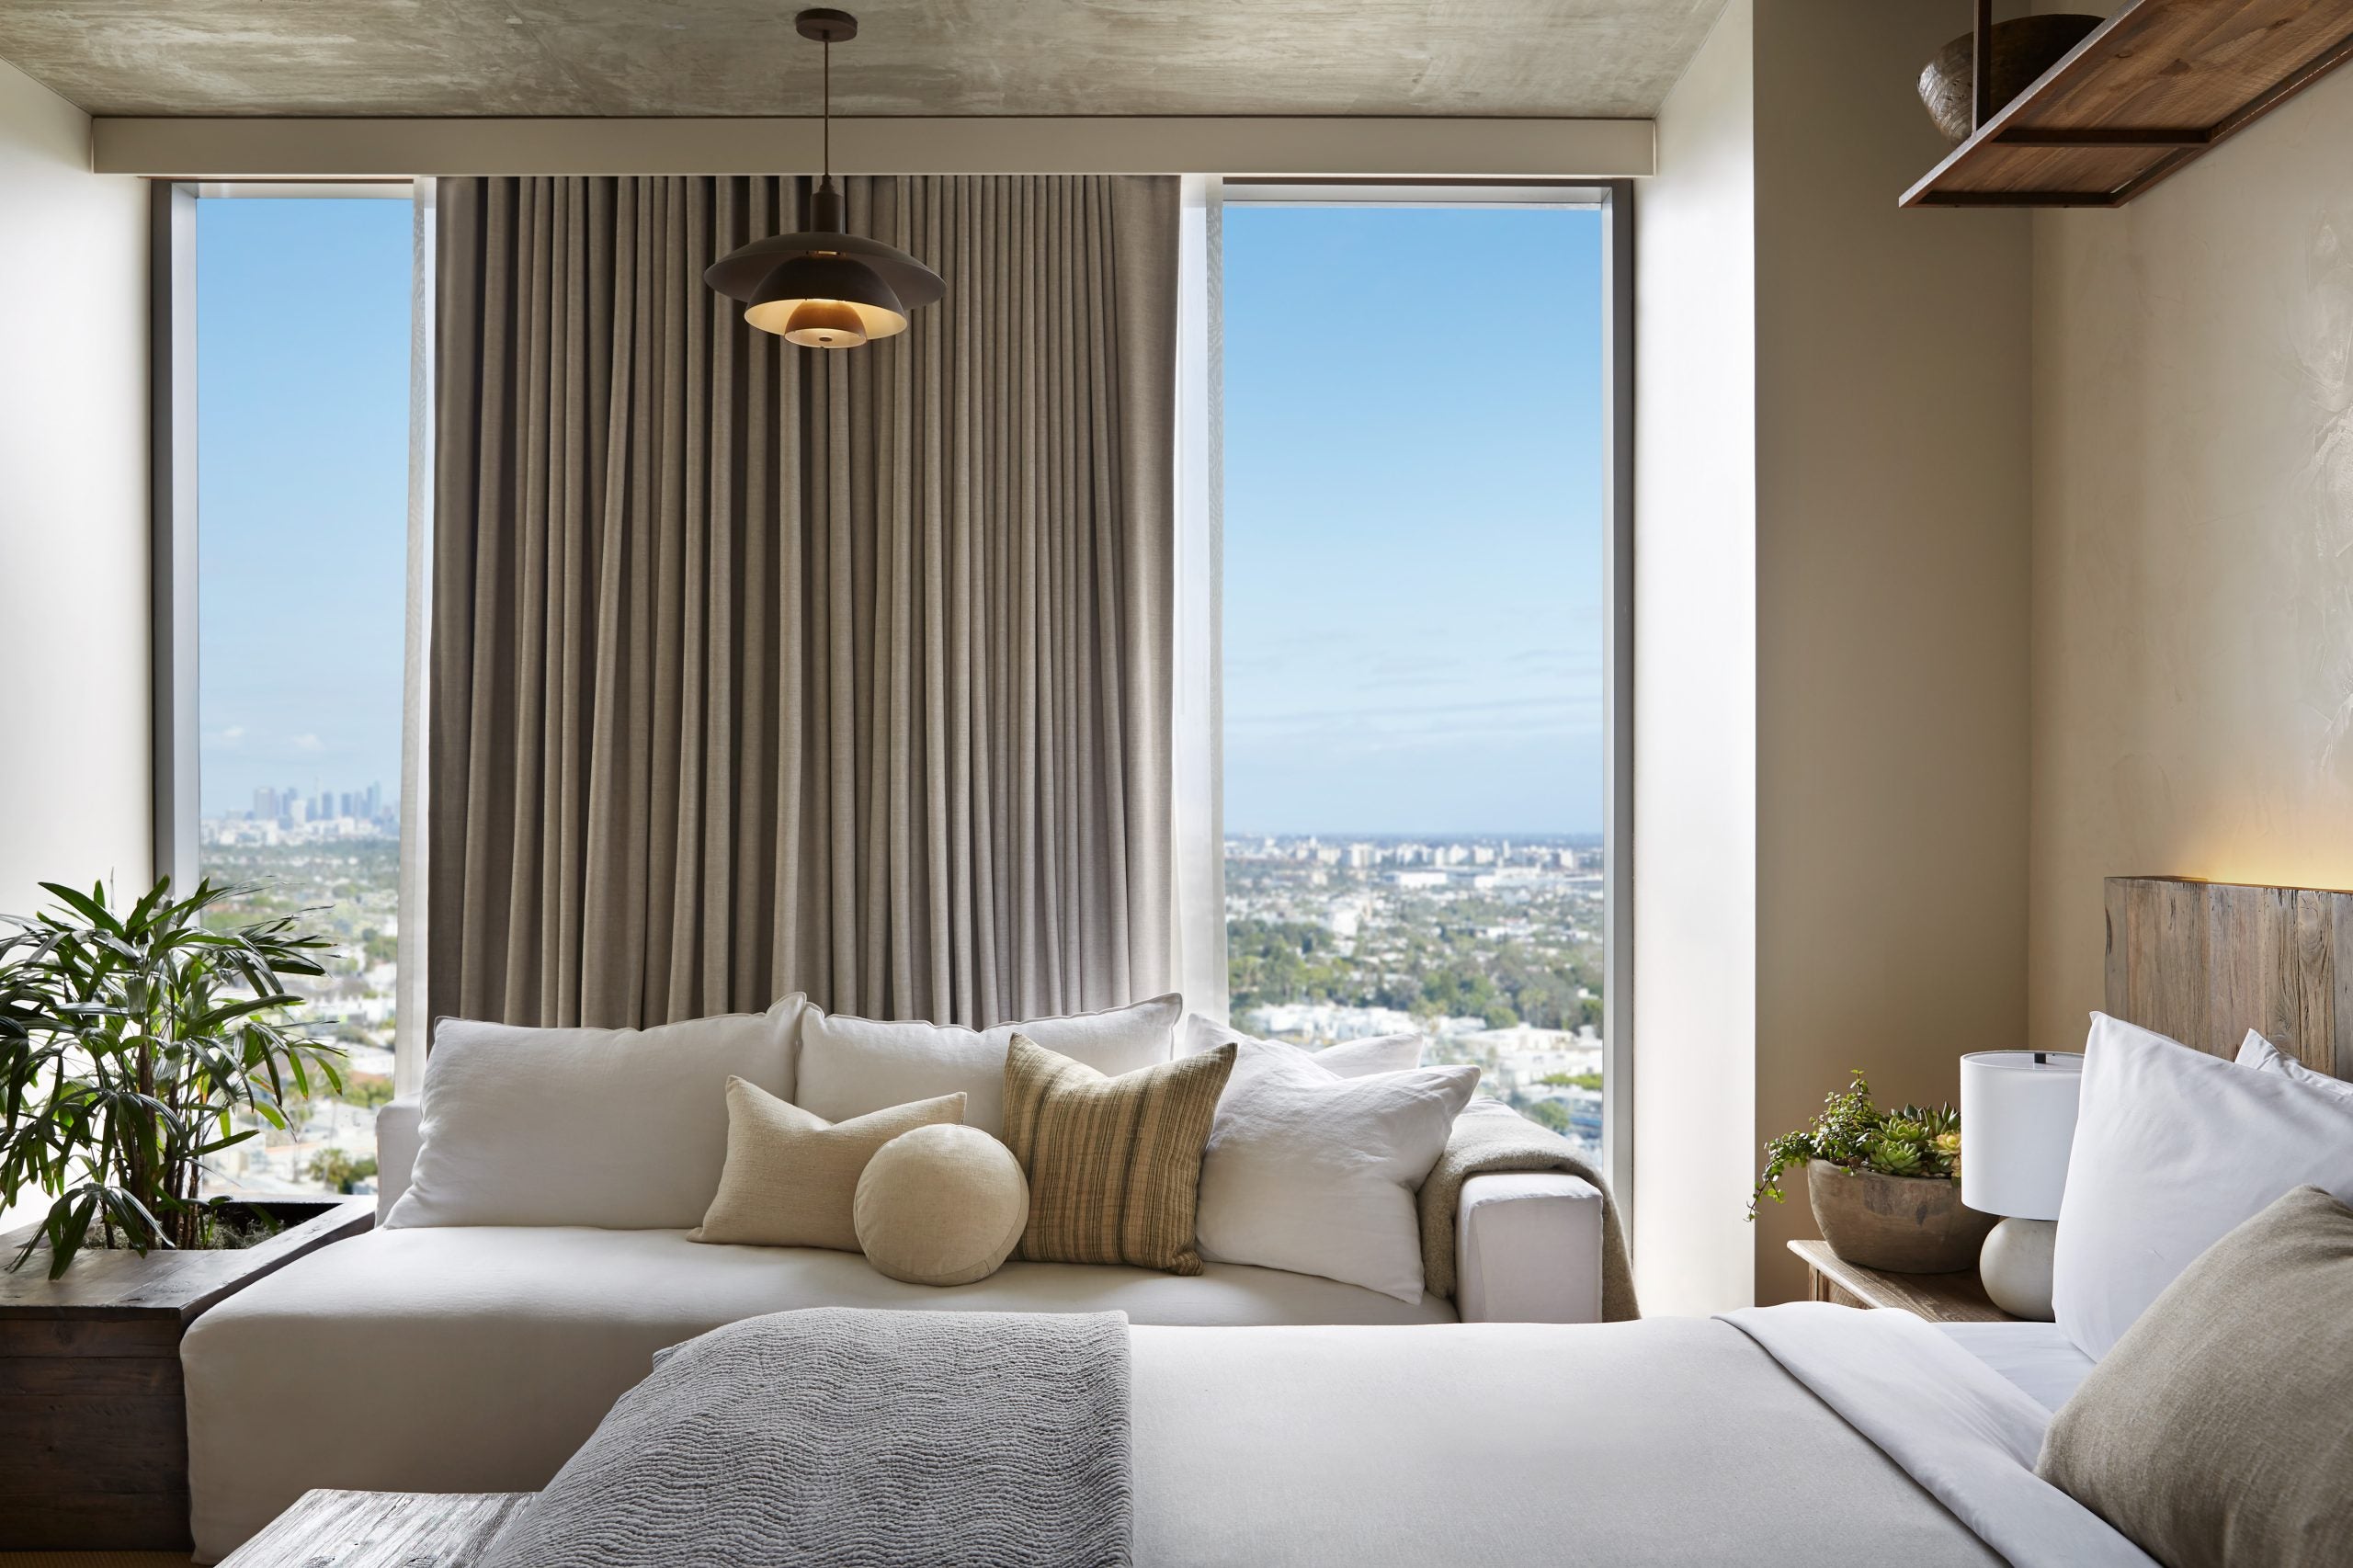 Living Well: A Staycation At The 1 Hotel West Hollywood Is The Perfect Spring Break Getaway